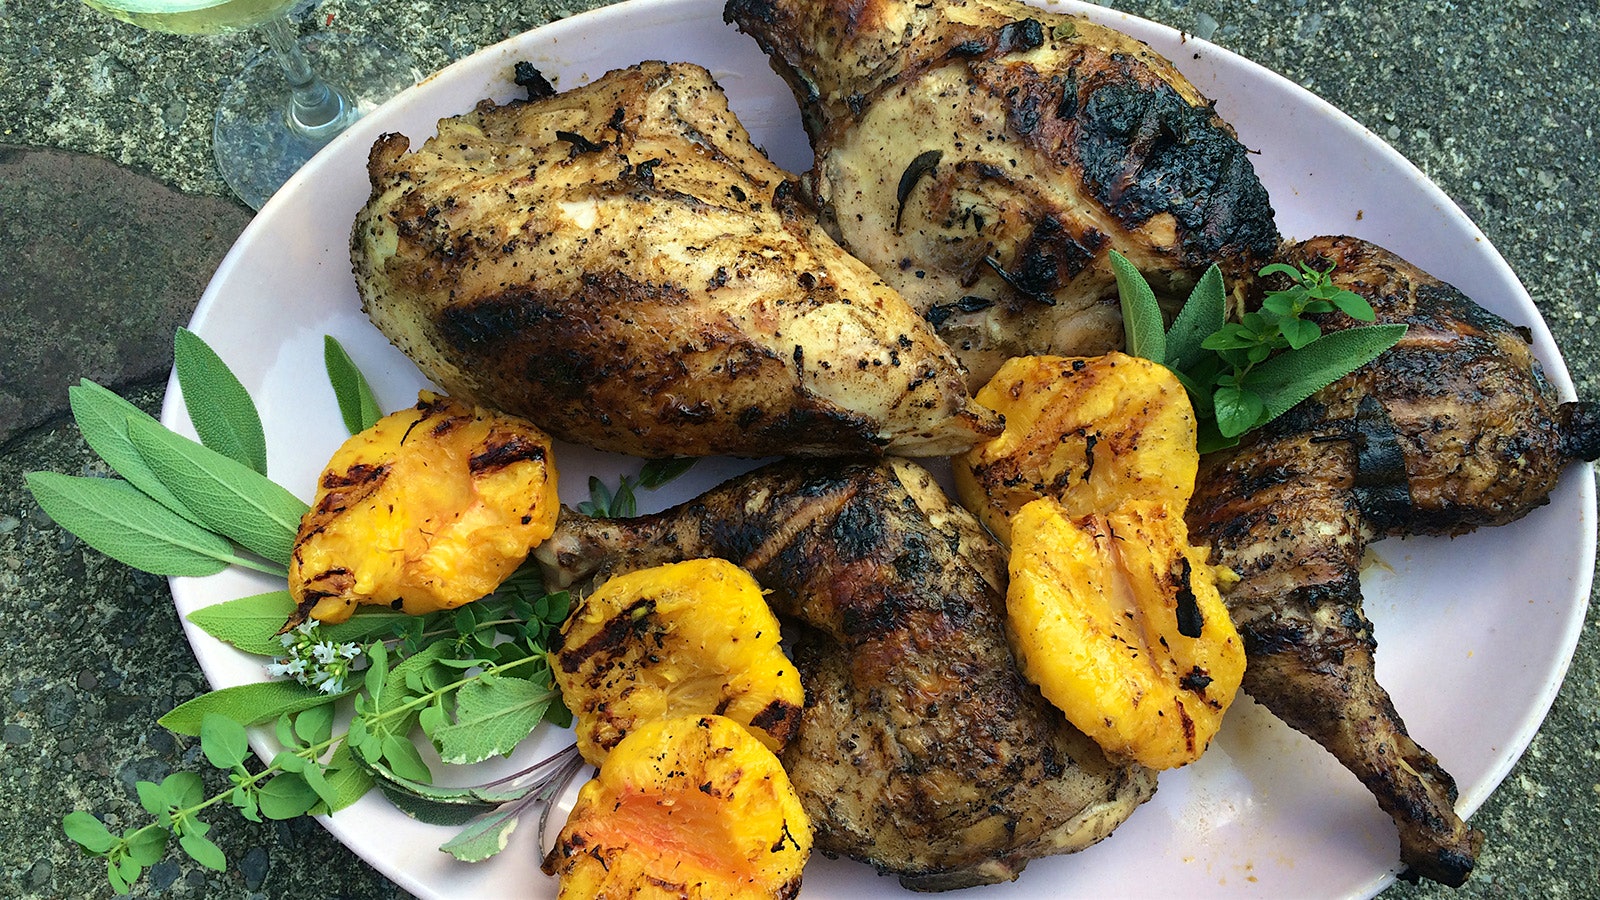  A platter of "Cornell Chicken" and slightly charred grilled peaches, garnished with sprigs of fresh sage and oregano